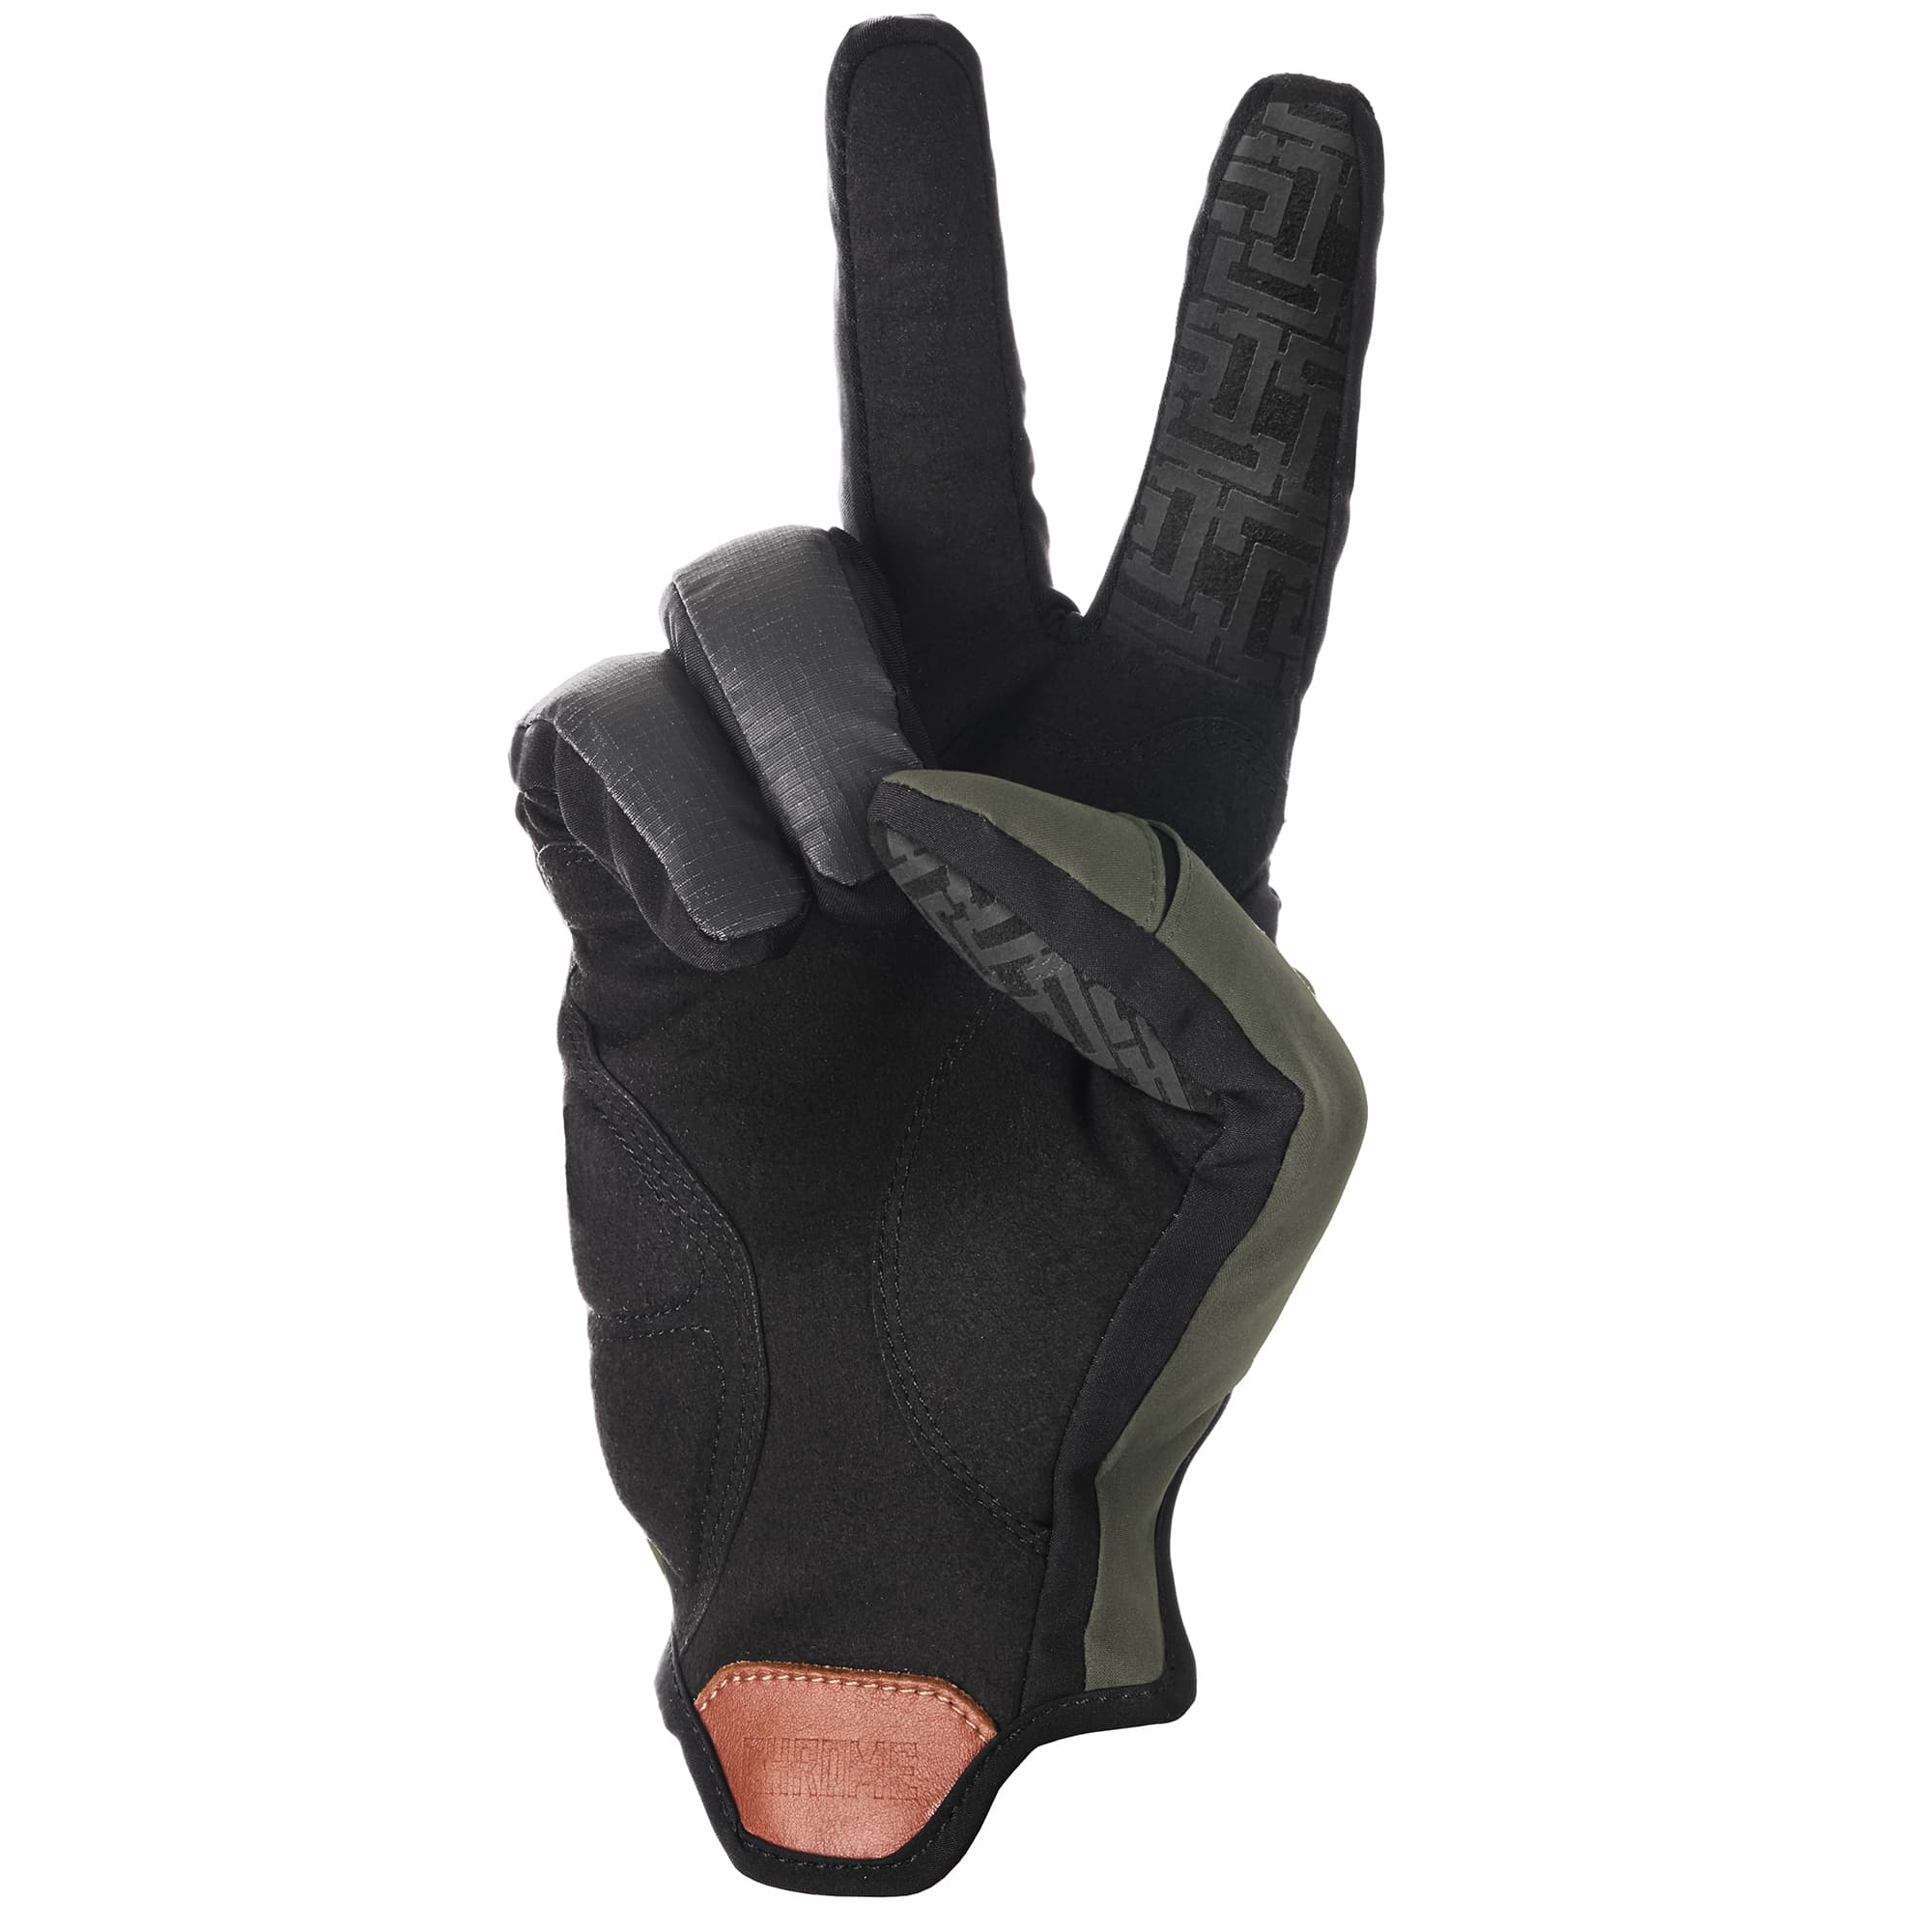 Midweight Cycle Gloves (Olive/Black)